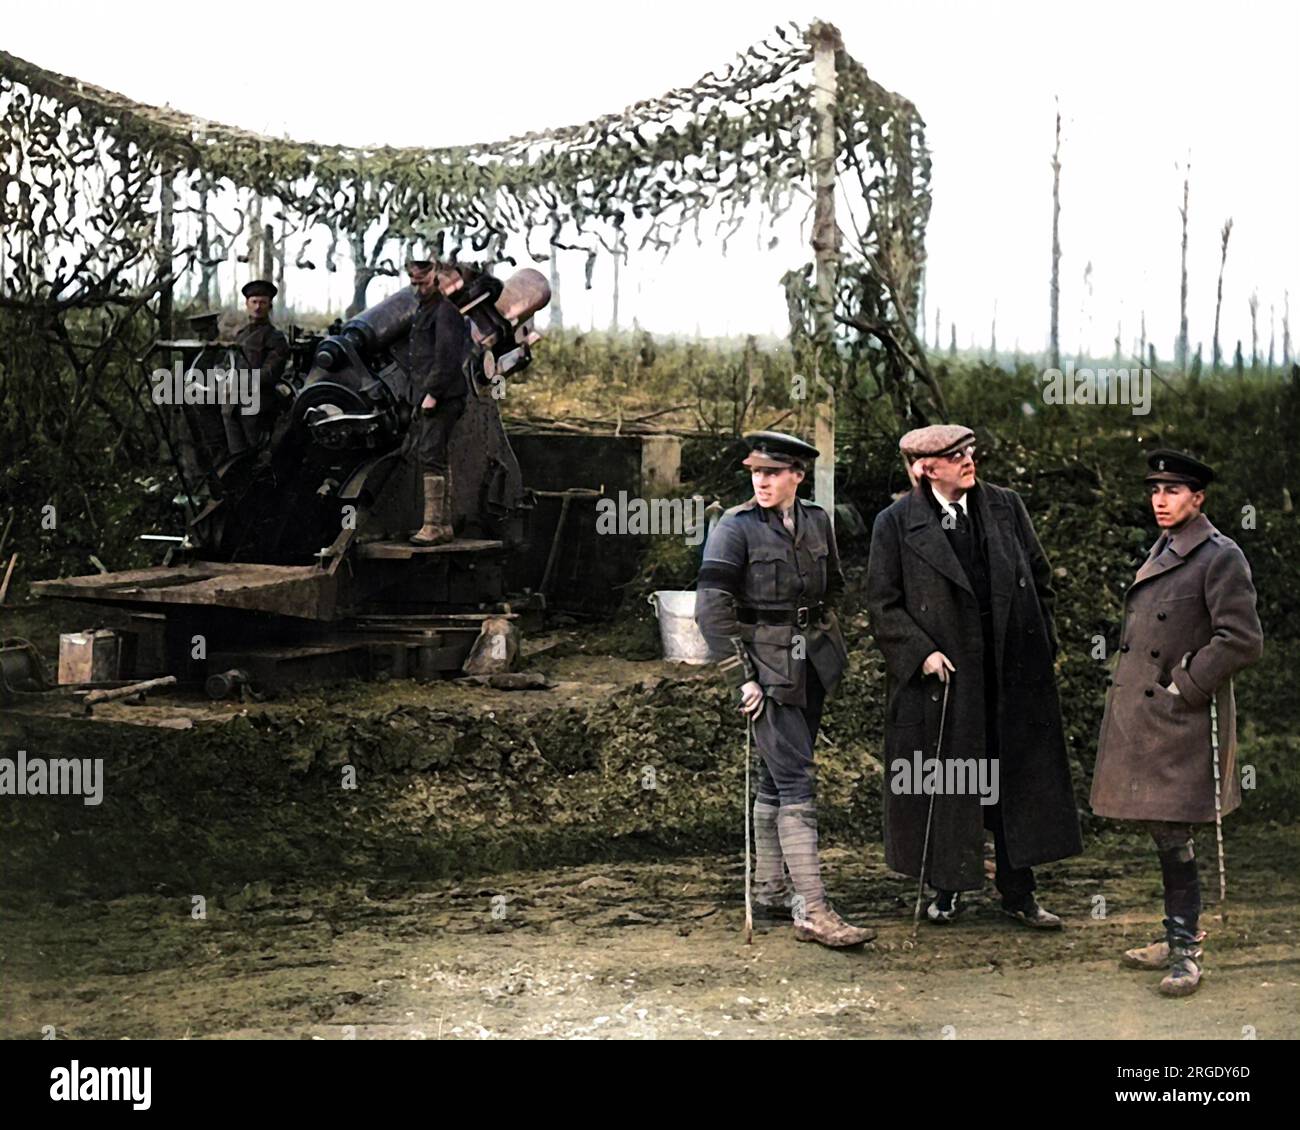 Arthur Balfour (central figure in flat cap) as Foreign Secretary in David Lloyd George's wartime coalition government, viewing a 9.2-inch British howitzer during his visit to the Western Front (location unknown) in the autumn of 1916. On the right is Sir Philip Sassoon, private secretary to Earl Haig during World War One, also an MP, art collector and society host. Stock Photo